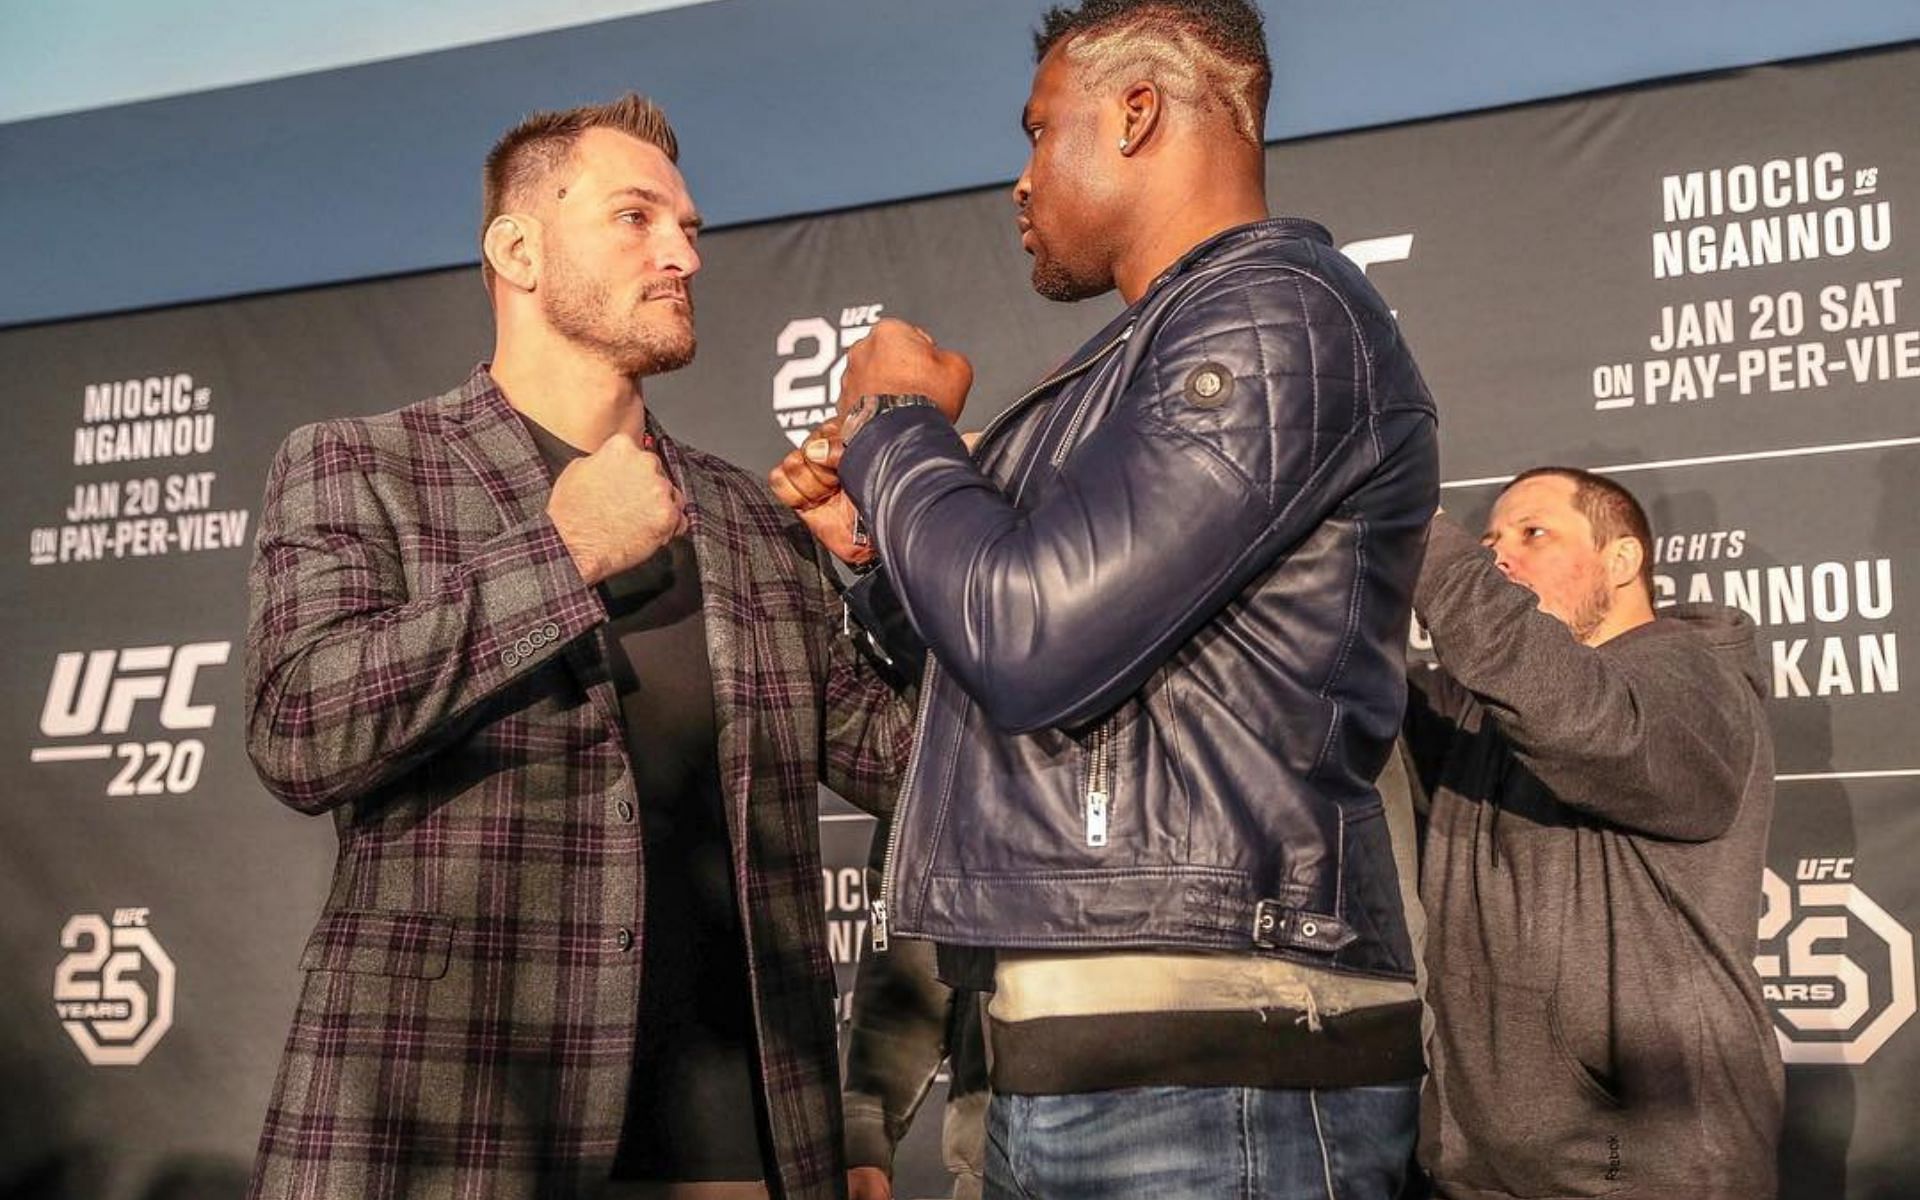 Stipe Miocic and Francis Ngannou squaring off [images from @stipemiocic]